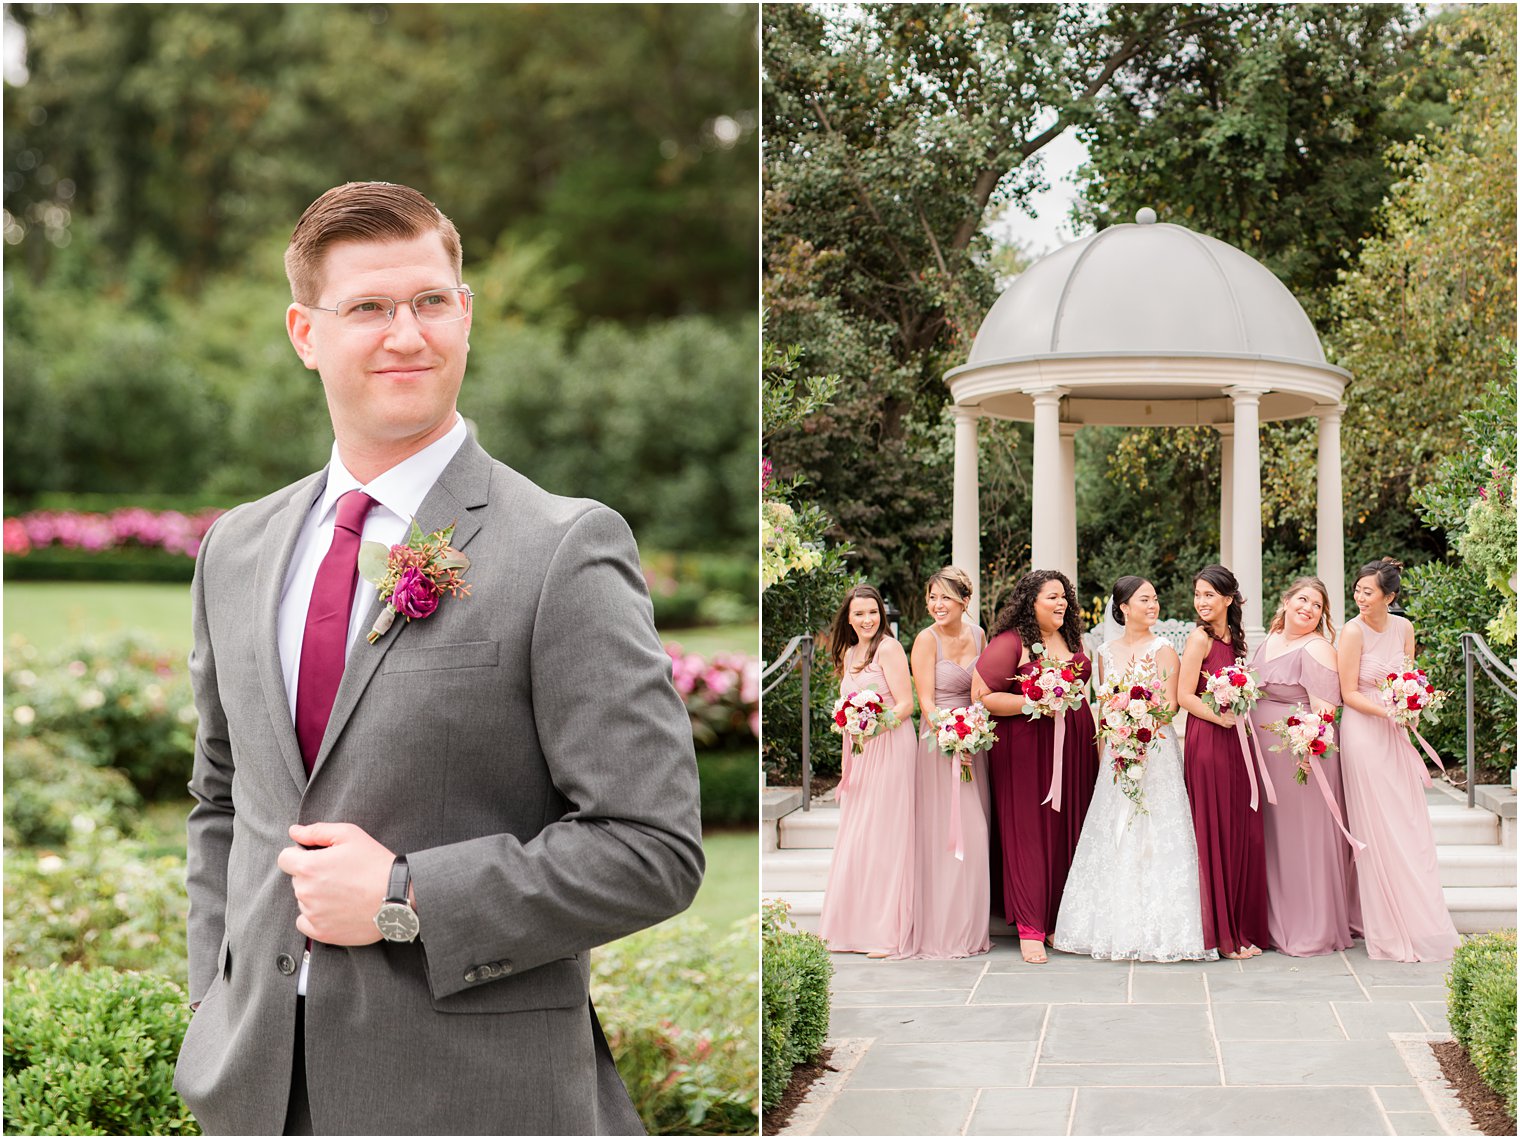 Idalia Photography photographs groom and bridesmaids in Park Chateau Estate gardens